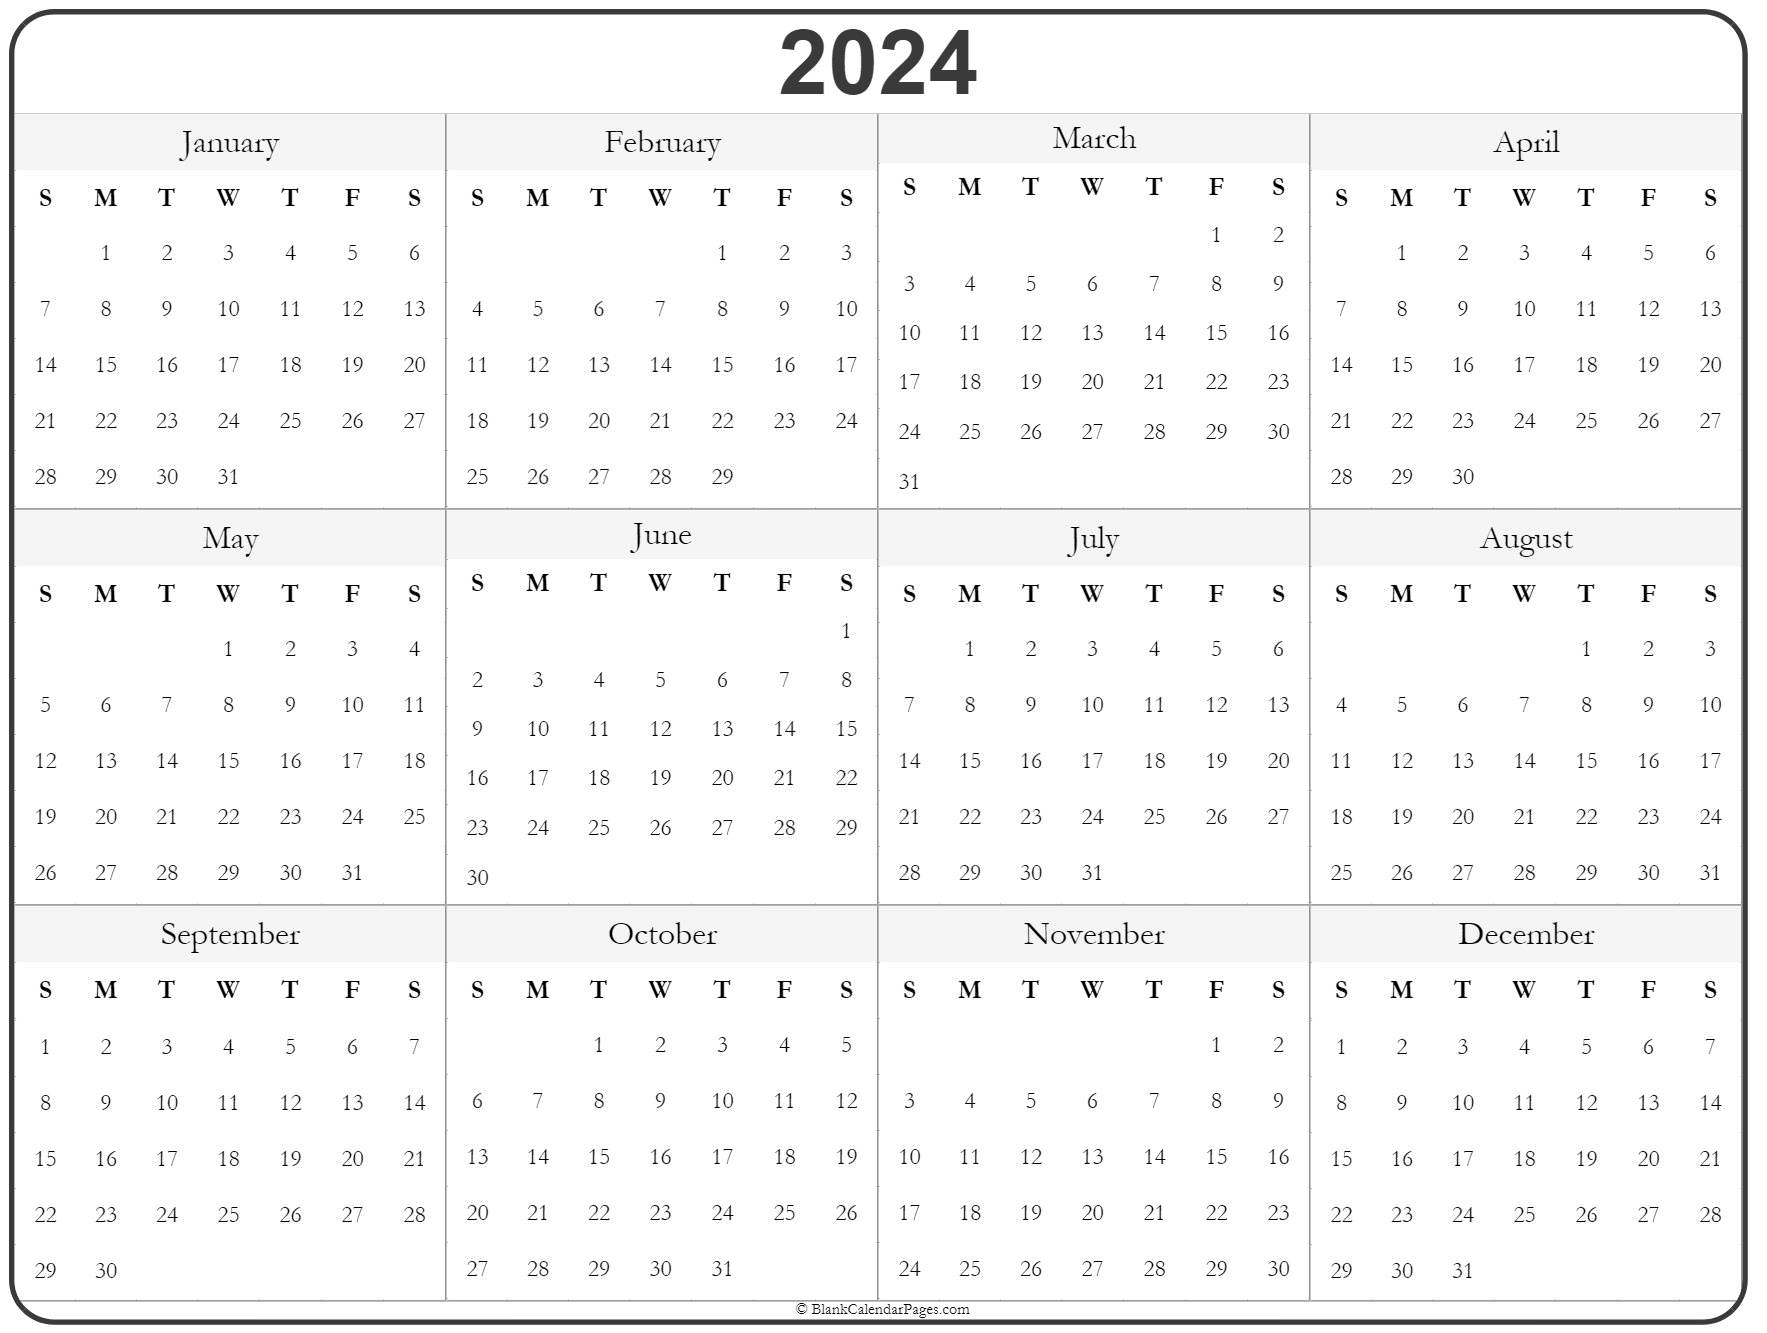 2024 Year Calendar Yearly Printable | Free Printable 2024 Entire Yearly Calendar